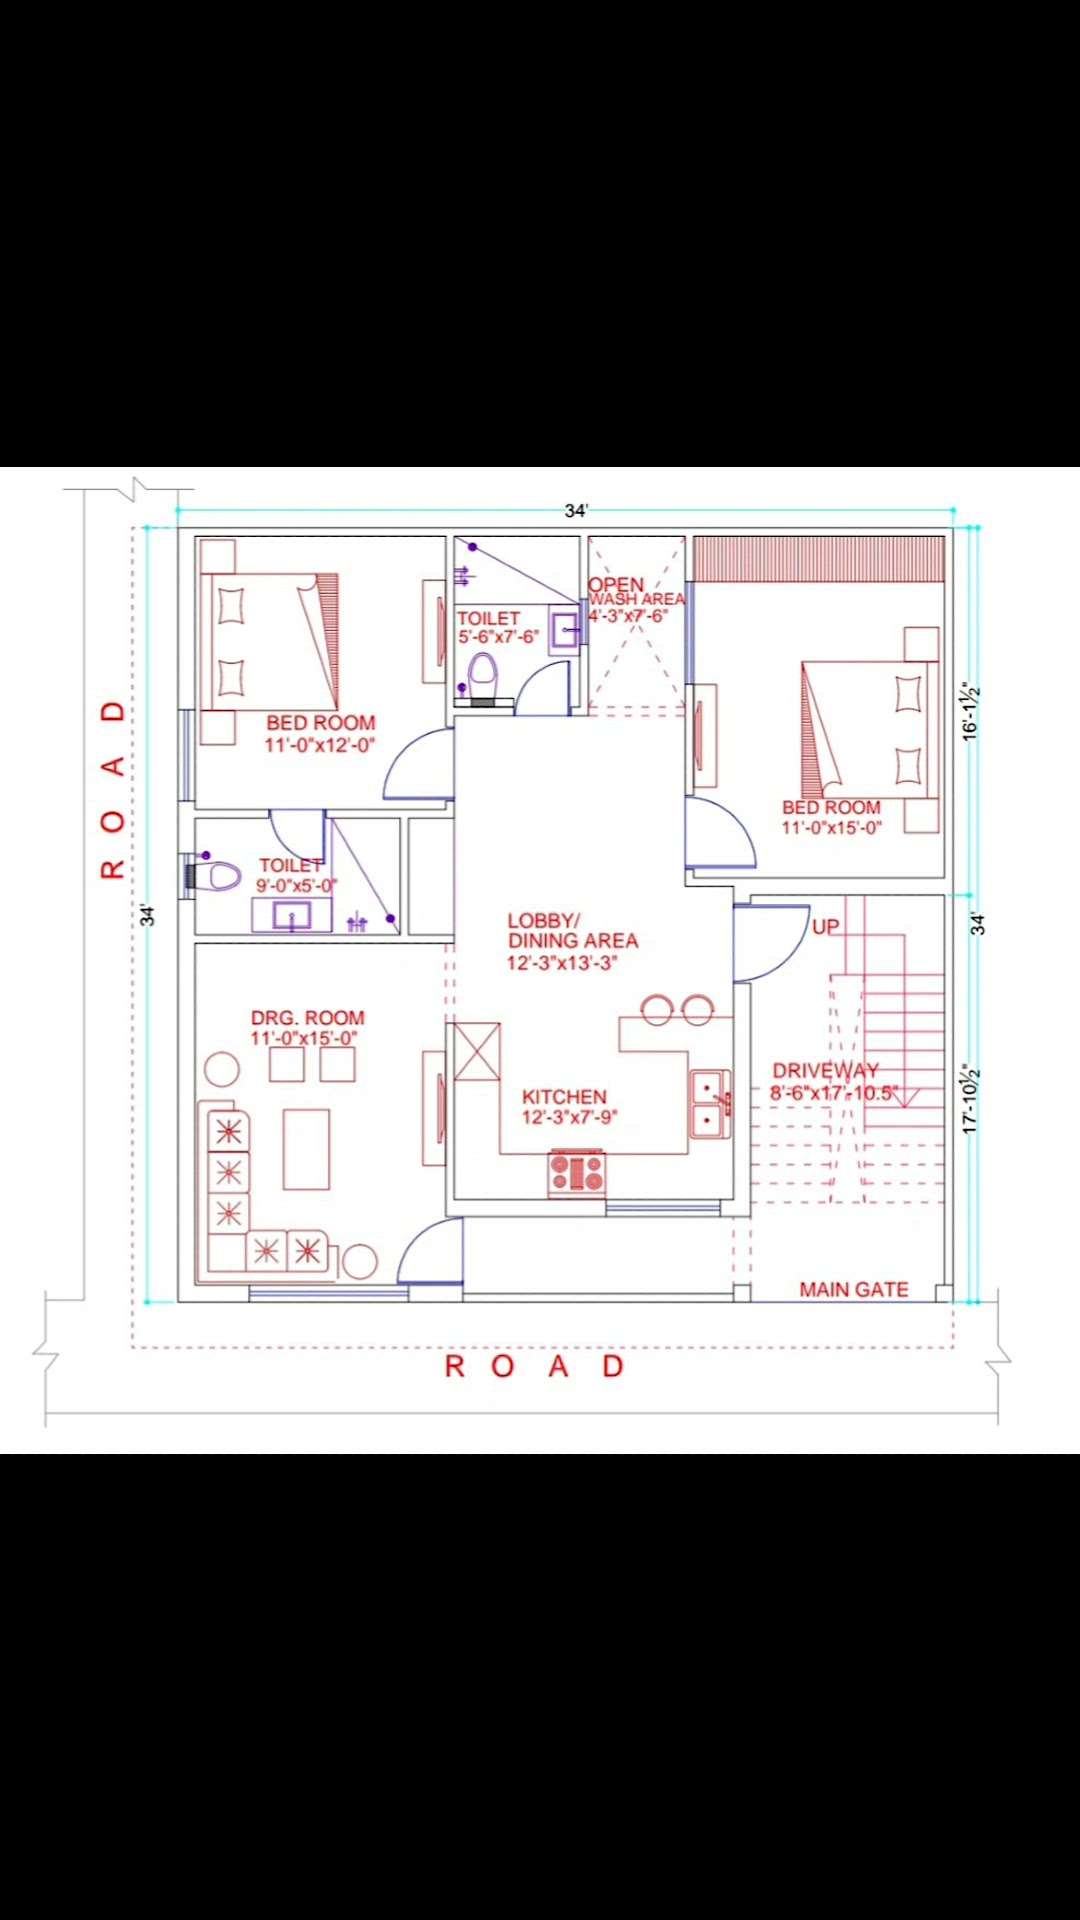 Floor Planning 34'-0" X 34'-0" ❤️
8077017254
Elite Decore N Design 
My Work

Low Price

Message Now

Reasonable Rate

For Construction of Home & Design msg

Like & Share the Page

We do Vastu Work Also.

Awesome Construction

Tag ur Frnds Guyz so dat they can make this modern home..

DM for Credit

#architecturelovers #renderlovers #architecture #coronarenderer #renderbox #instarender #indorizayka #renderhunter #render_contest #allofrenders #rendering #architecturedose #indore #artsytecture #interiordesignersofinsta #restlessarch #rendertrends #render_files #rendercollective #rendergallery #arch_more #architecture_hunter #instaarchitecture #archidesign #architecturedesign #homedesign #arkitektur #archilovers #archimodel #archieandrewsedit  #planning  #nakshadesign  #nakshaconstruction  #nakshacenter  #nakshacenter  #nakshacenter  #nakshamaker  #nakshaassociates  #nakshaconsultant  #nakshamp  #map